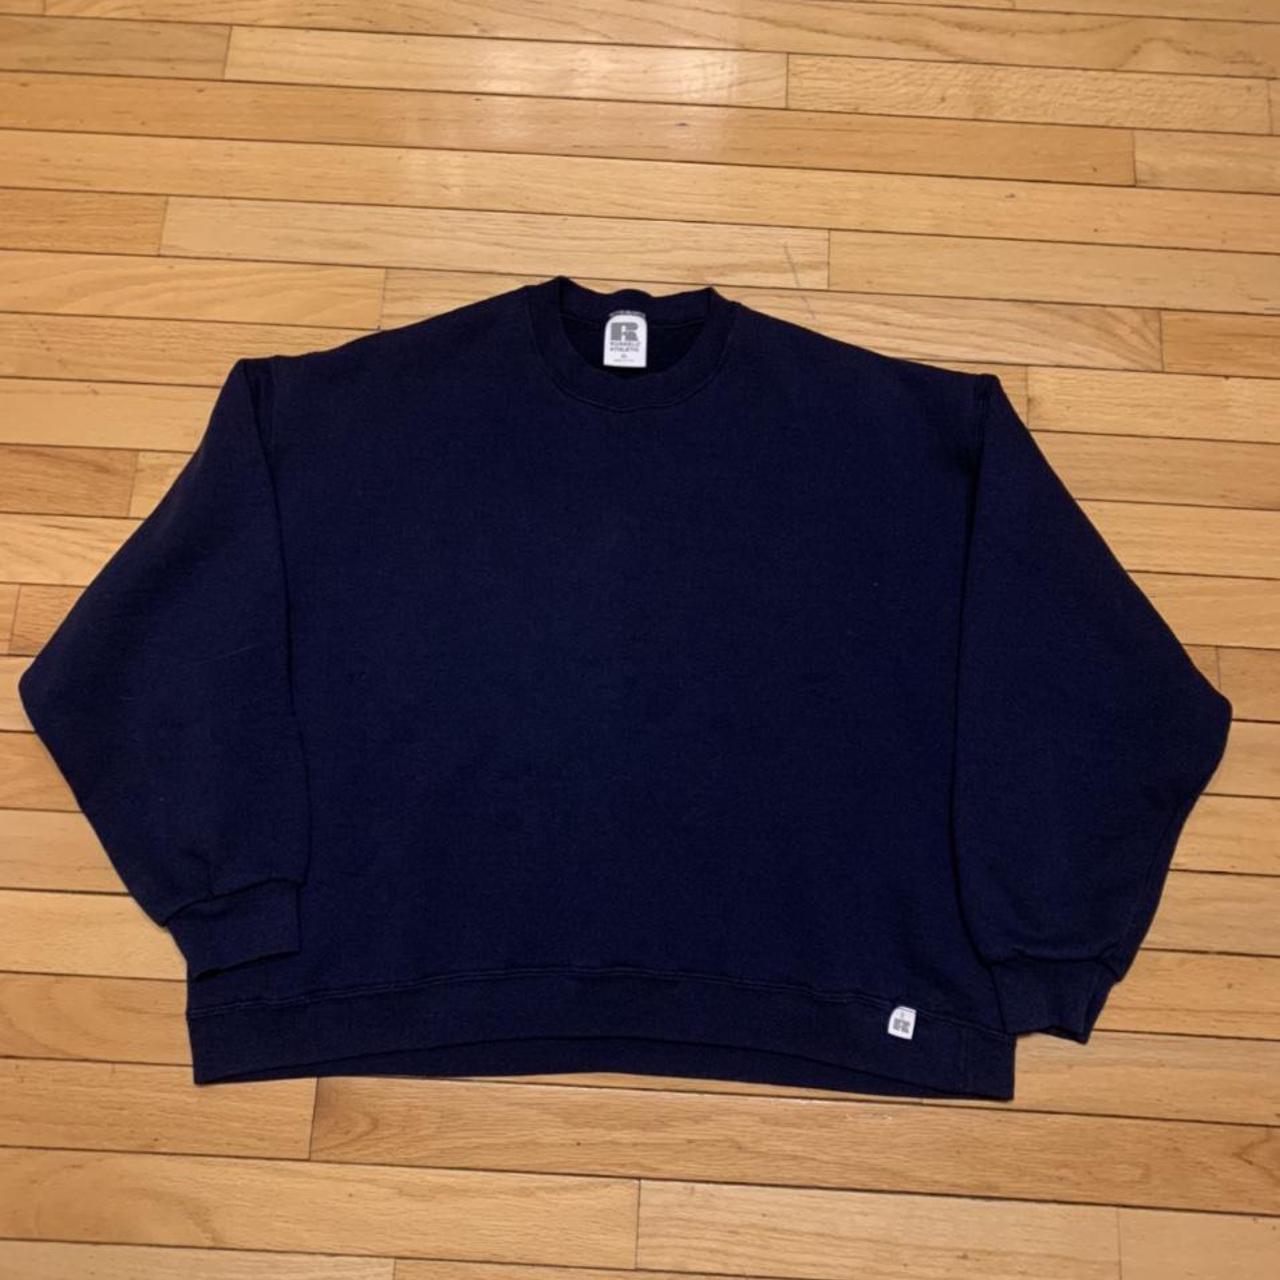 Vintage made in USA Russell athletic Crewneck - Depop